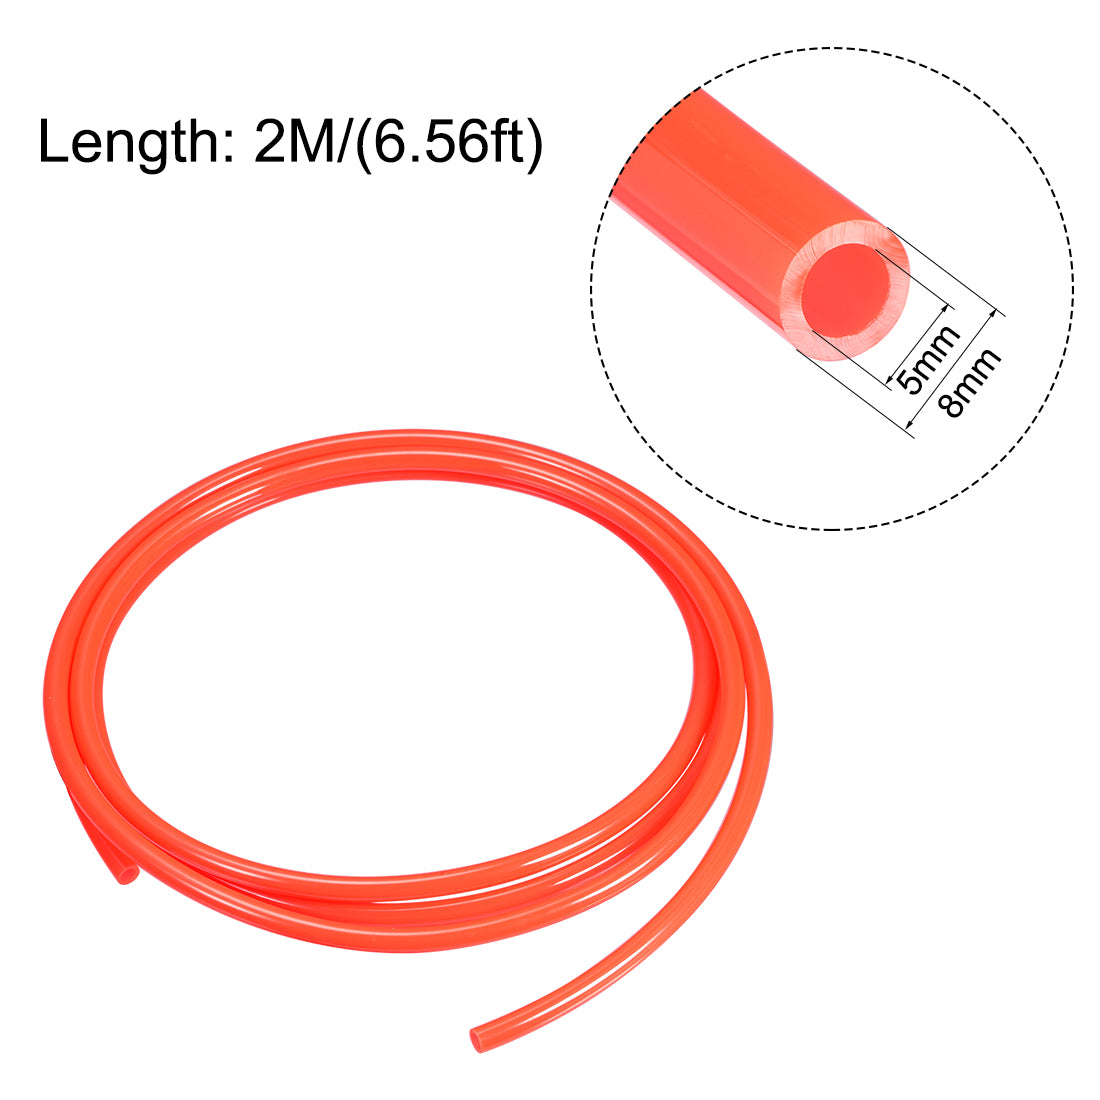 uxcell Uxcell Pneumatic Hose Tubing,8mm OD 5mm ID,Polyurethane PU Air Hose Pipe Tube,2 Meter 6.56ft,Red